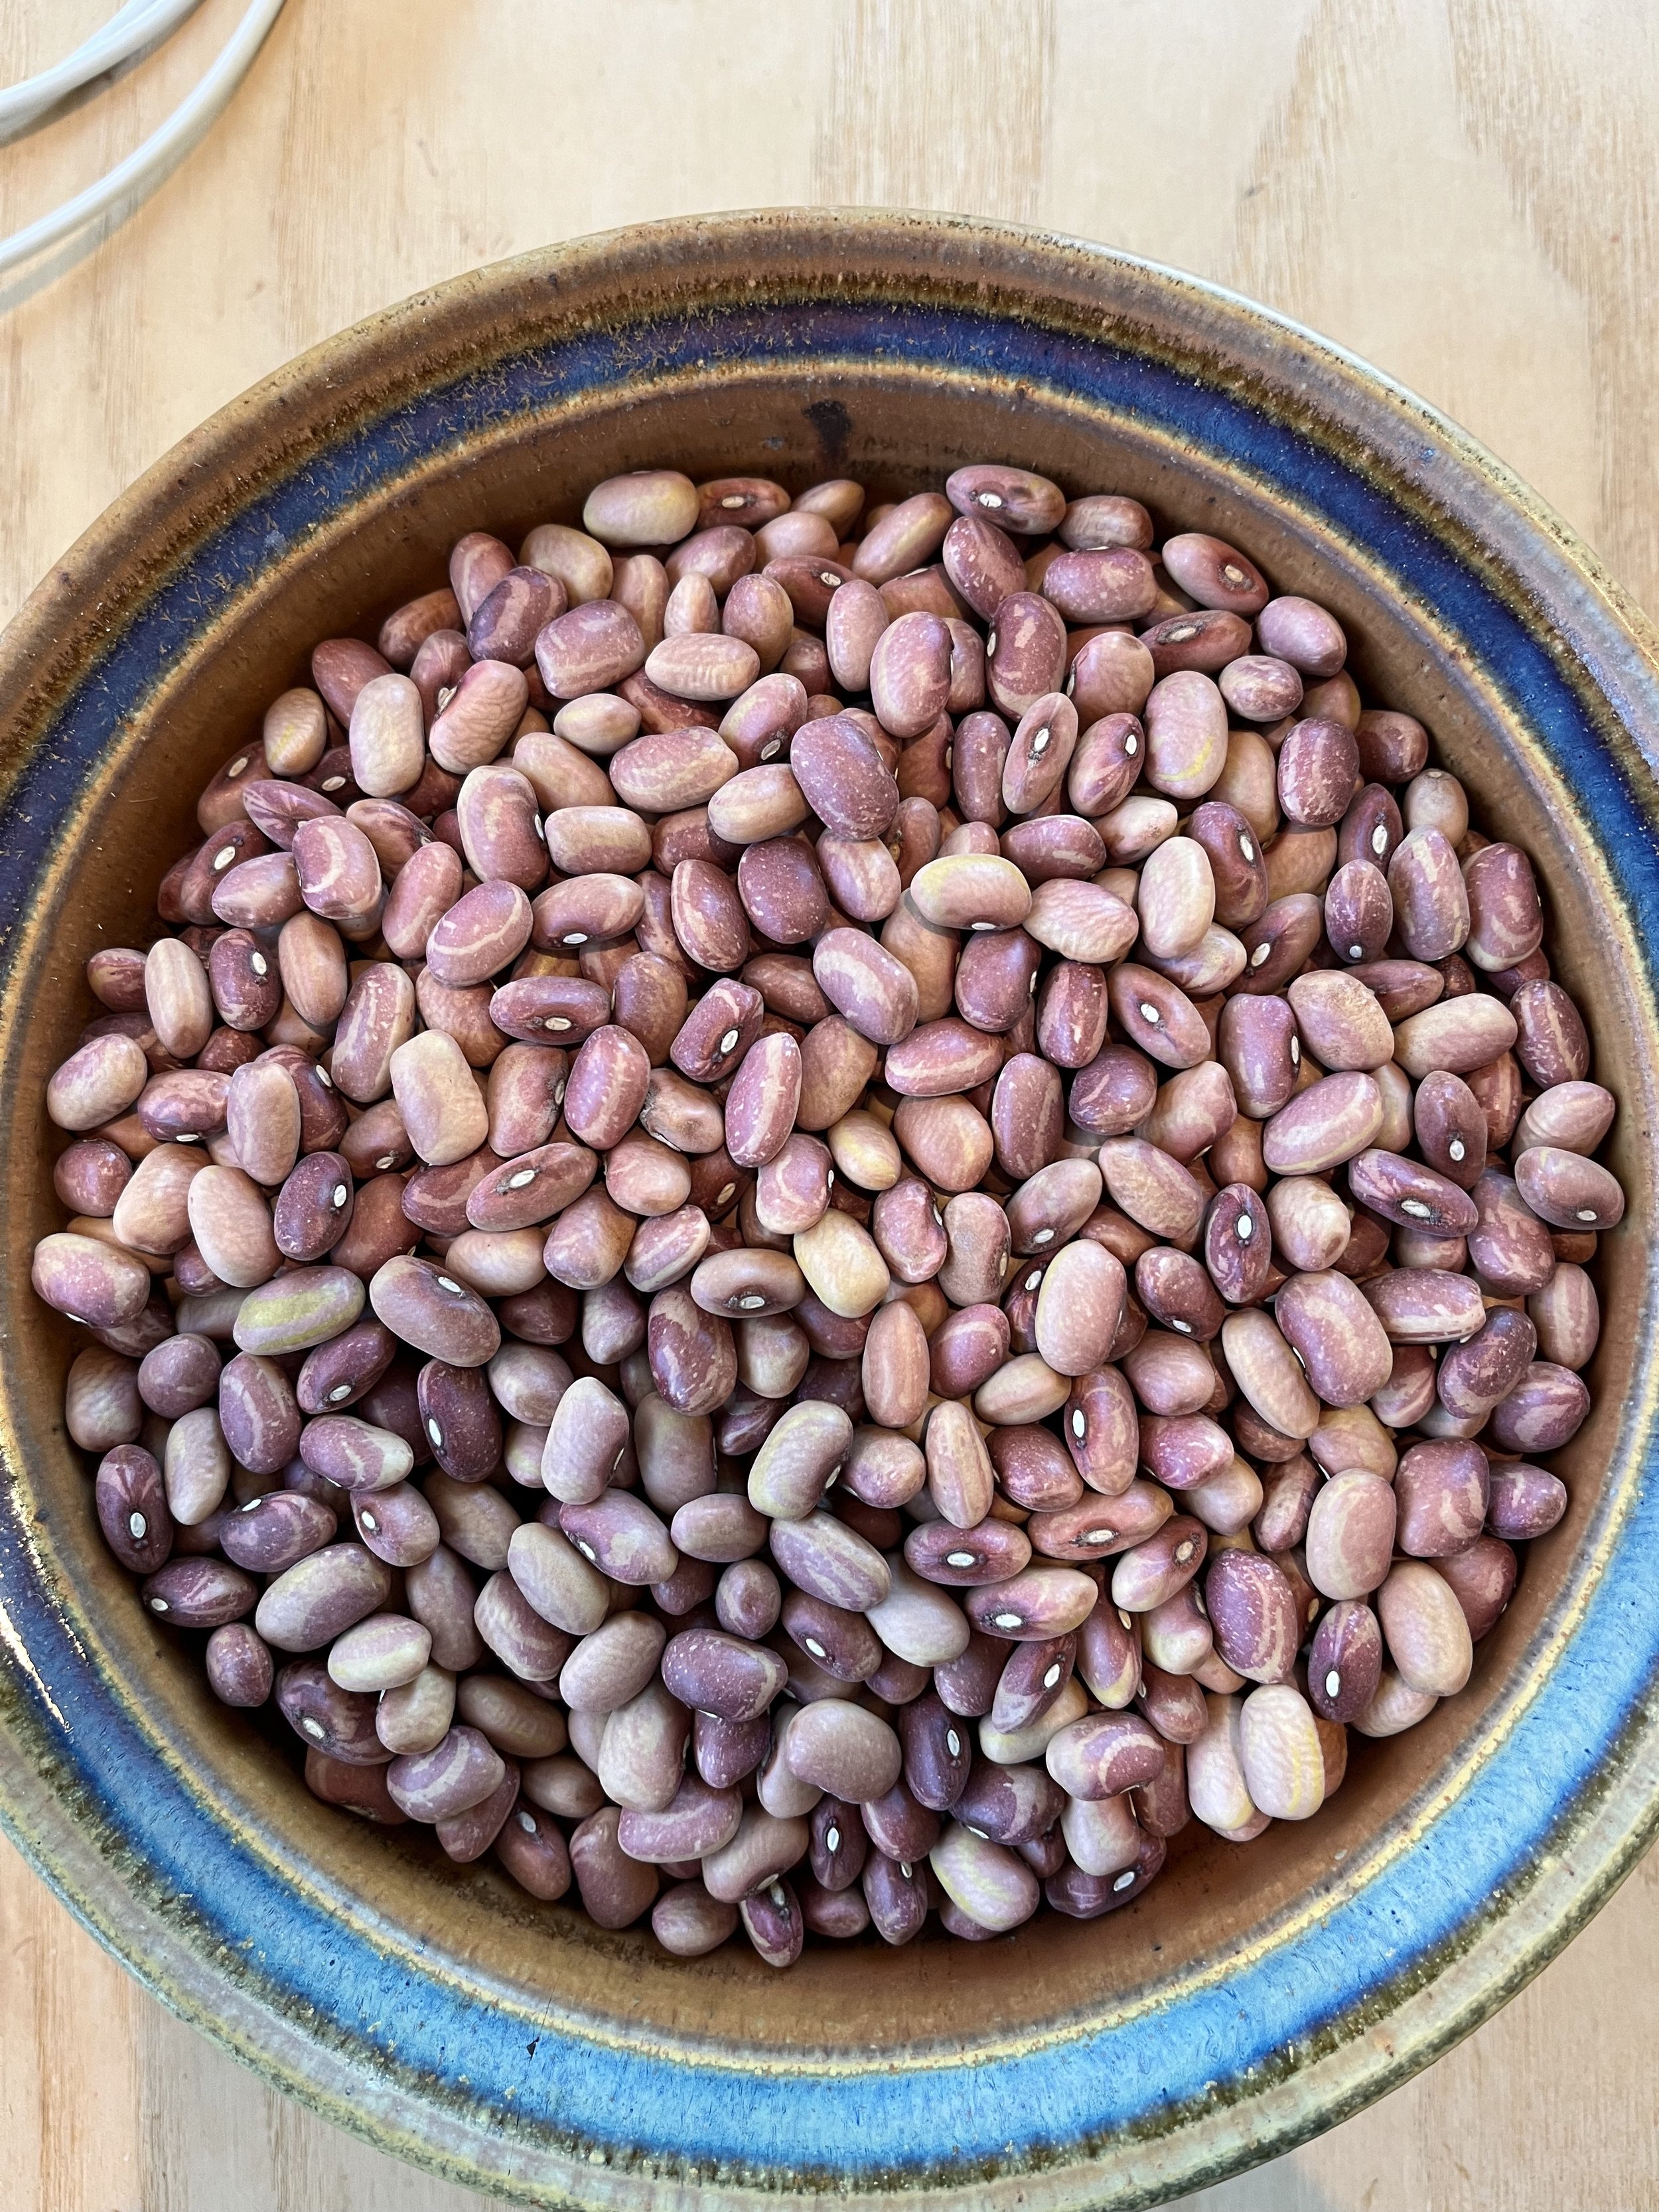 Flor de Junio // A small to medium sized bean popular in Mexican cuisine. Thin skinned, creamy and mild, tendency to melt into dishes when well cooked.